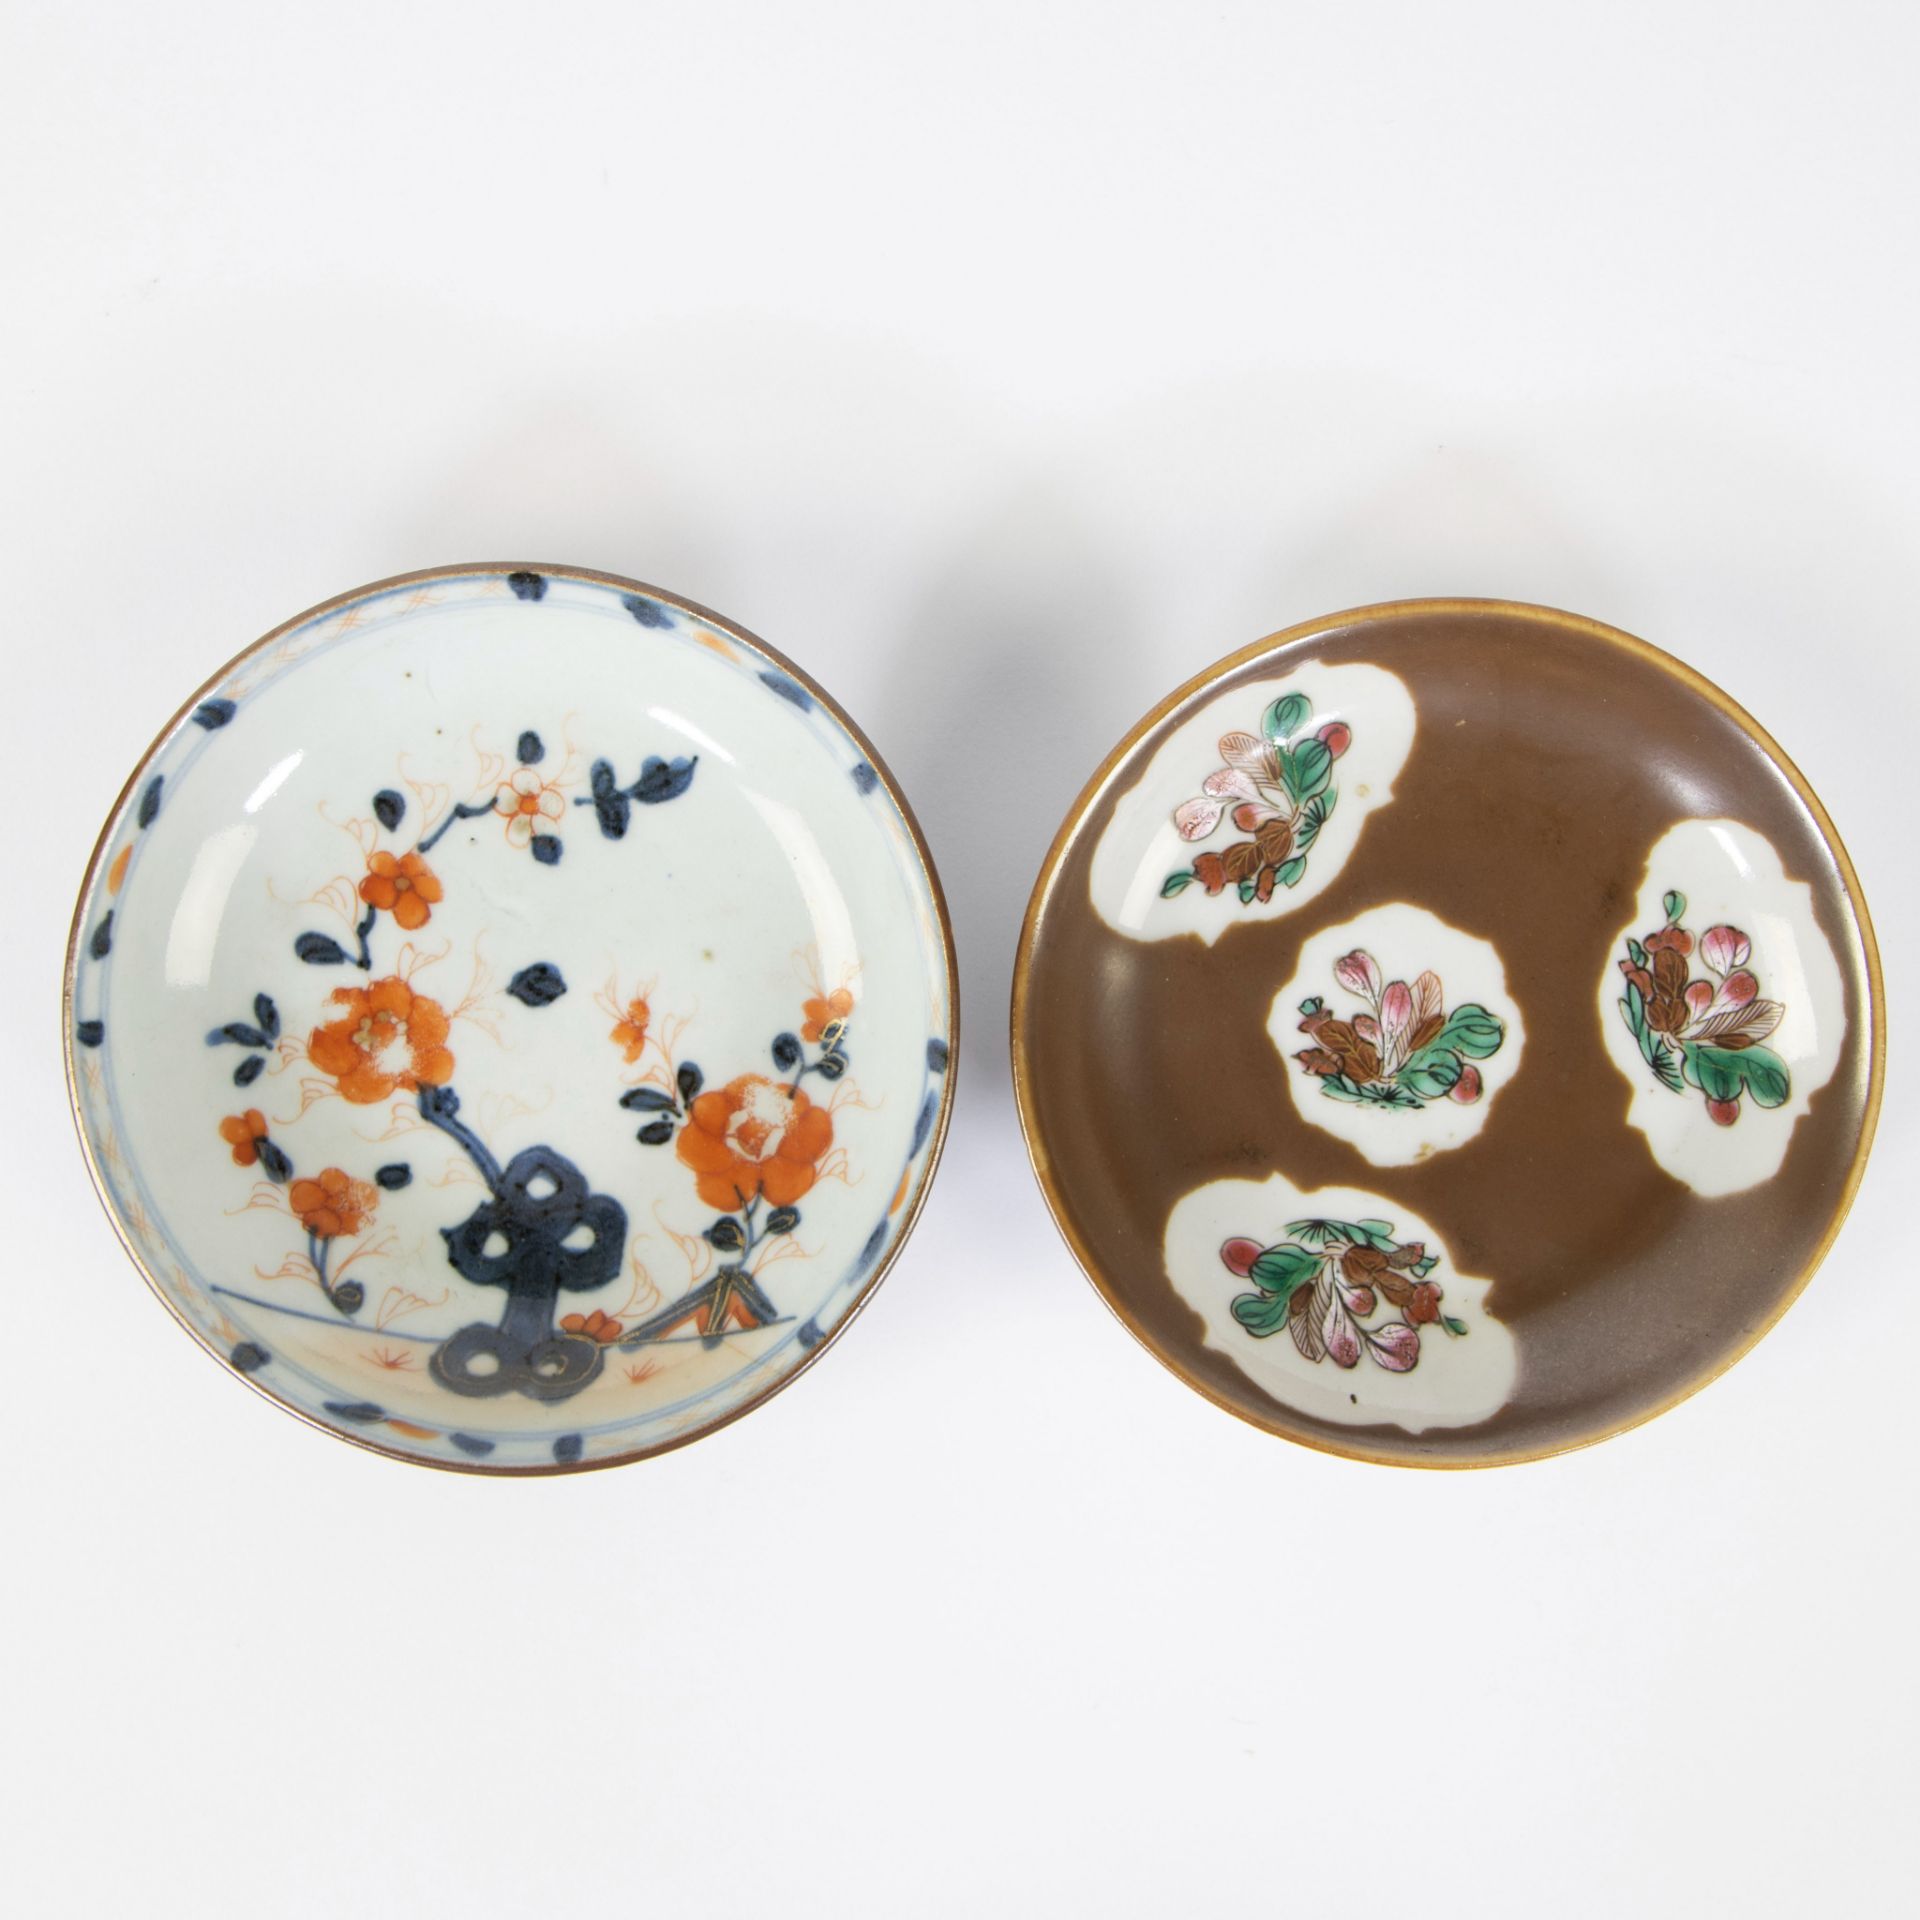 A set of Chinese batavia brown cups and saucers, one Imari cup and 2 plates blue/white, 18th C. - Image 10 of 11